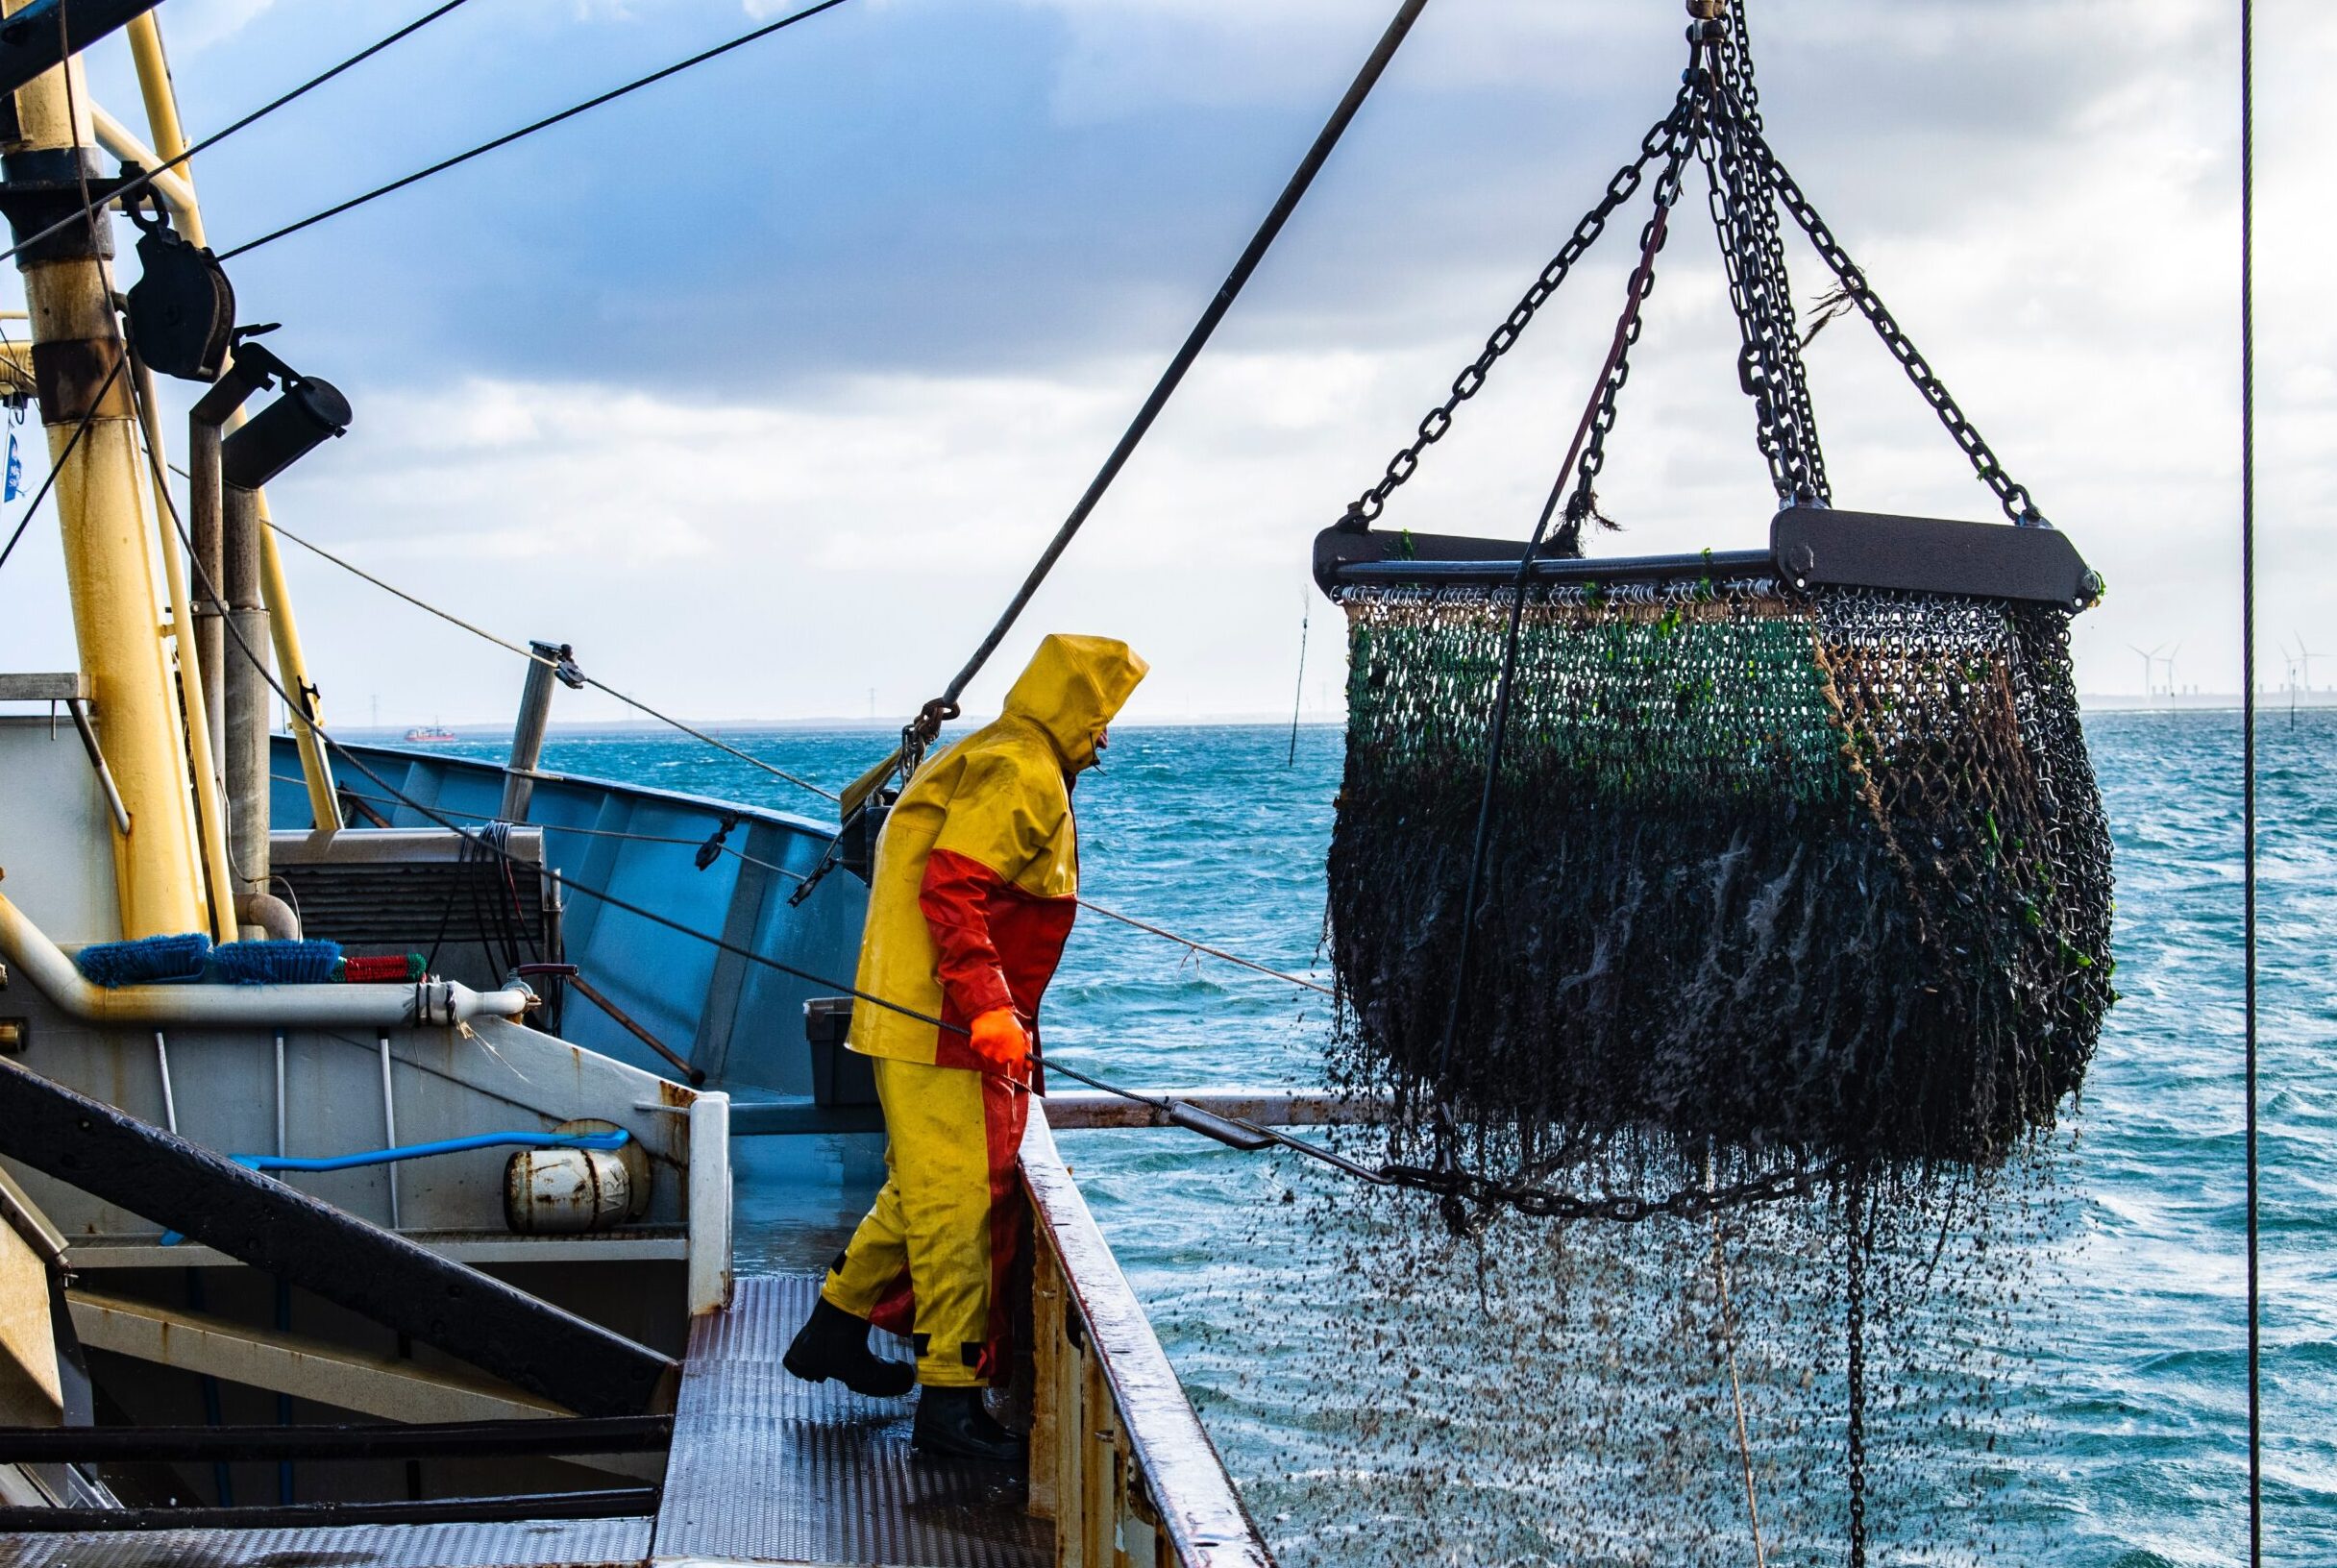 Discuss environmental challenges that impact fisheries and the importance of sustainable fishing practices to protect fish populations and their habitats